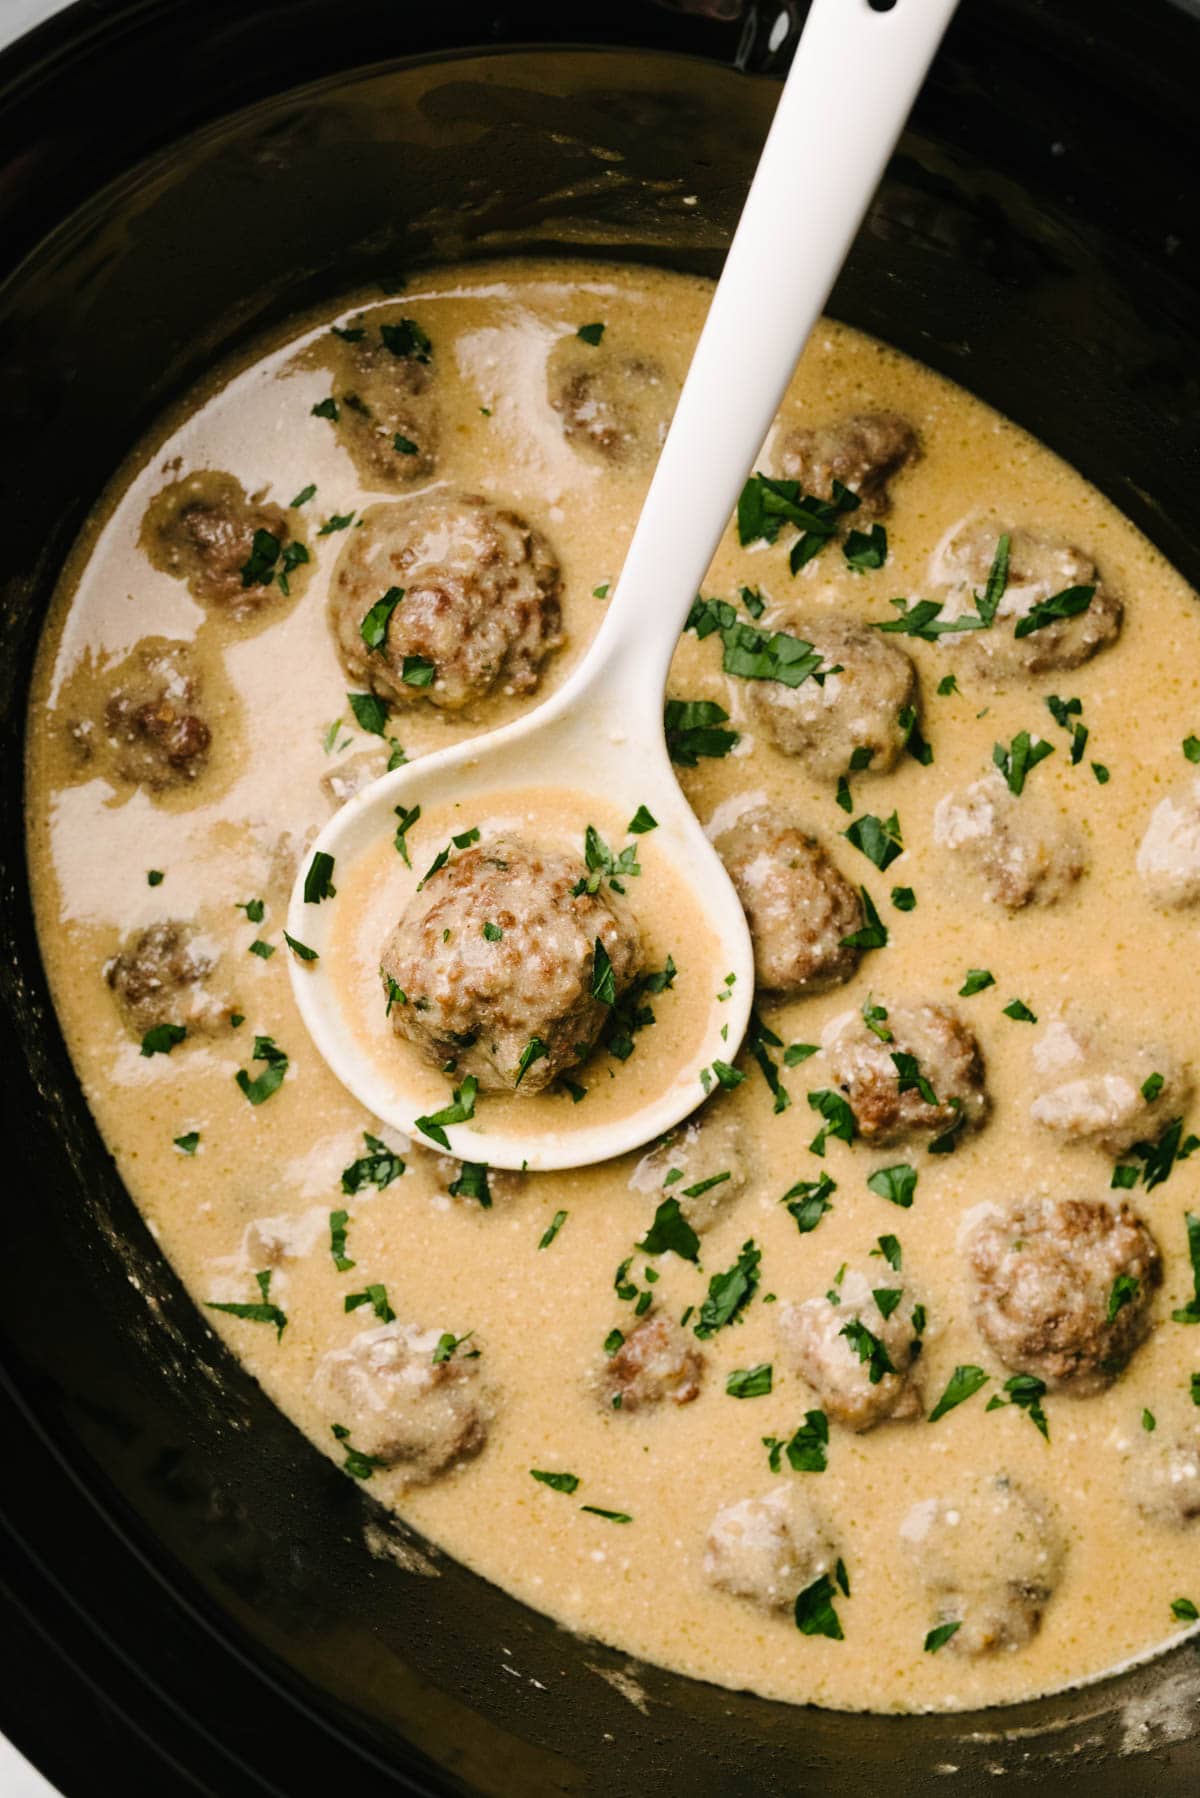 A white ladle tucked into a crockpot of Swedish meatballs in a creamy sauce, garnished with fresh parsley.